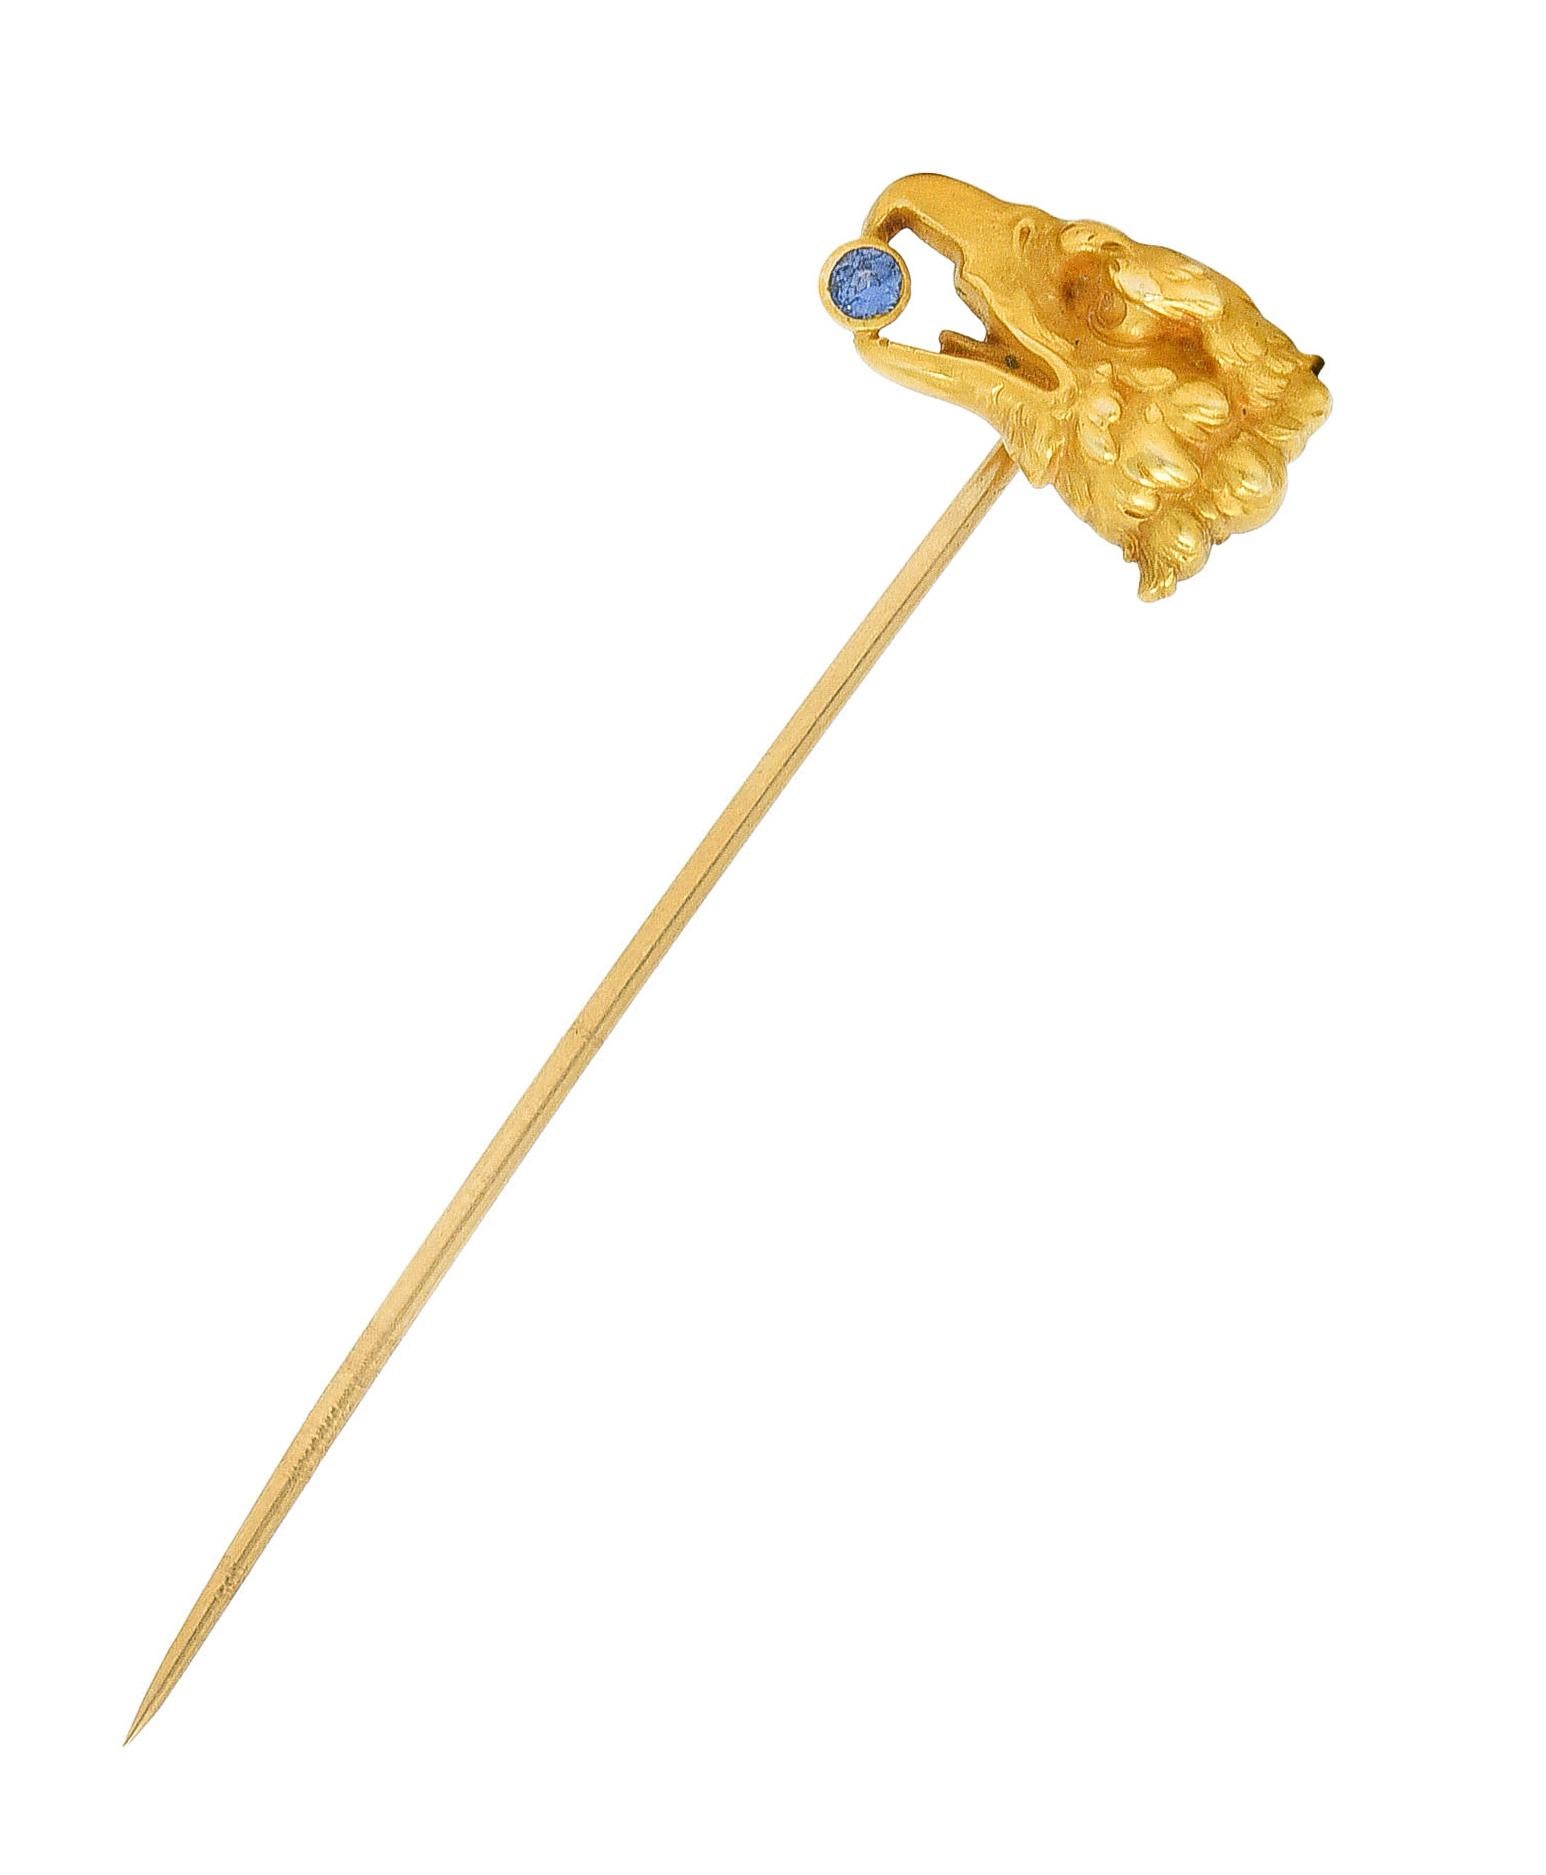 Stickpin designed as stylized eagle bust

Accented by textured feathers with a 2.5 mm round sapphire in beak

Sapphire is medium in saturation and denim blue in color

Stamped 14k for 14 karat gold

Circa: 1905

Eagle head: 5/8 x 7/16 inch

Total